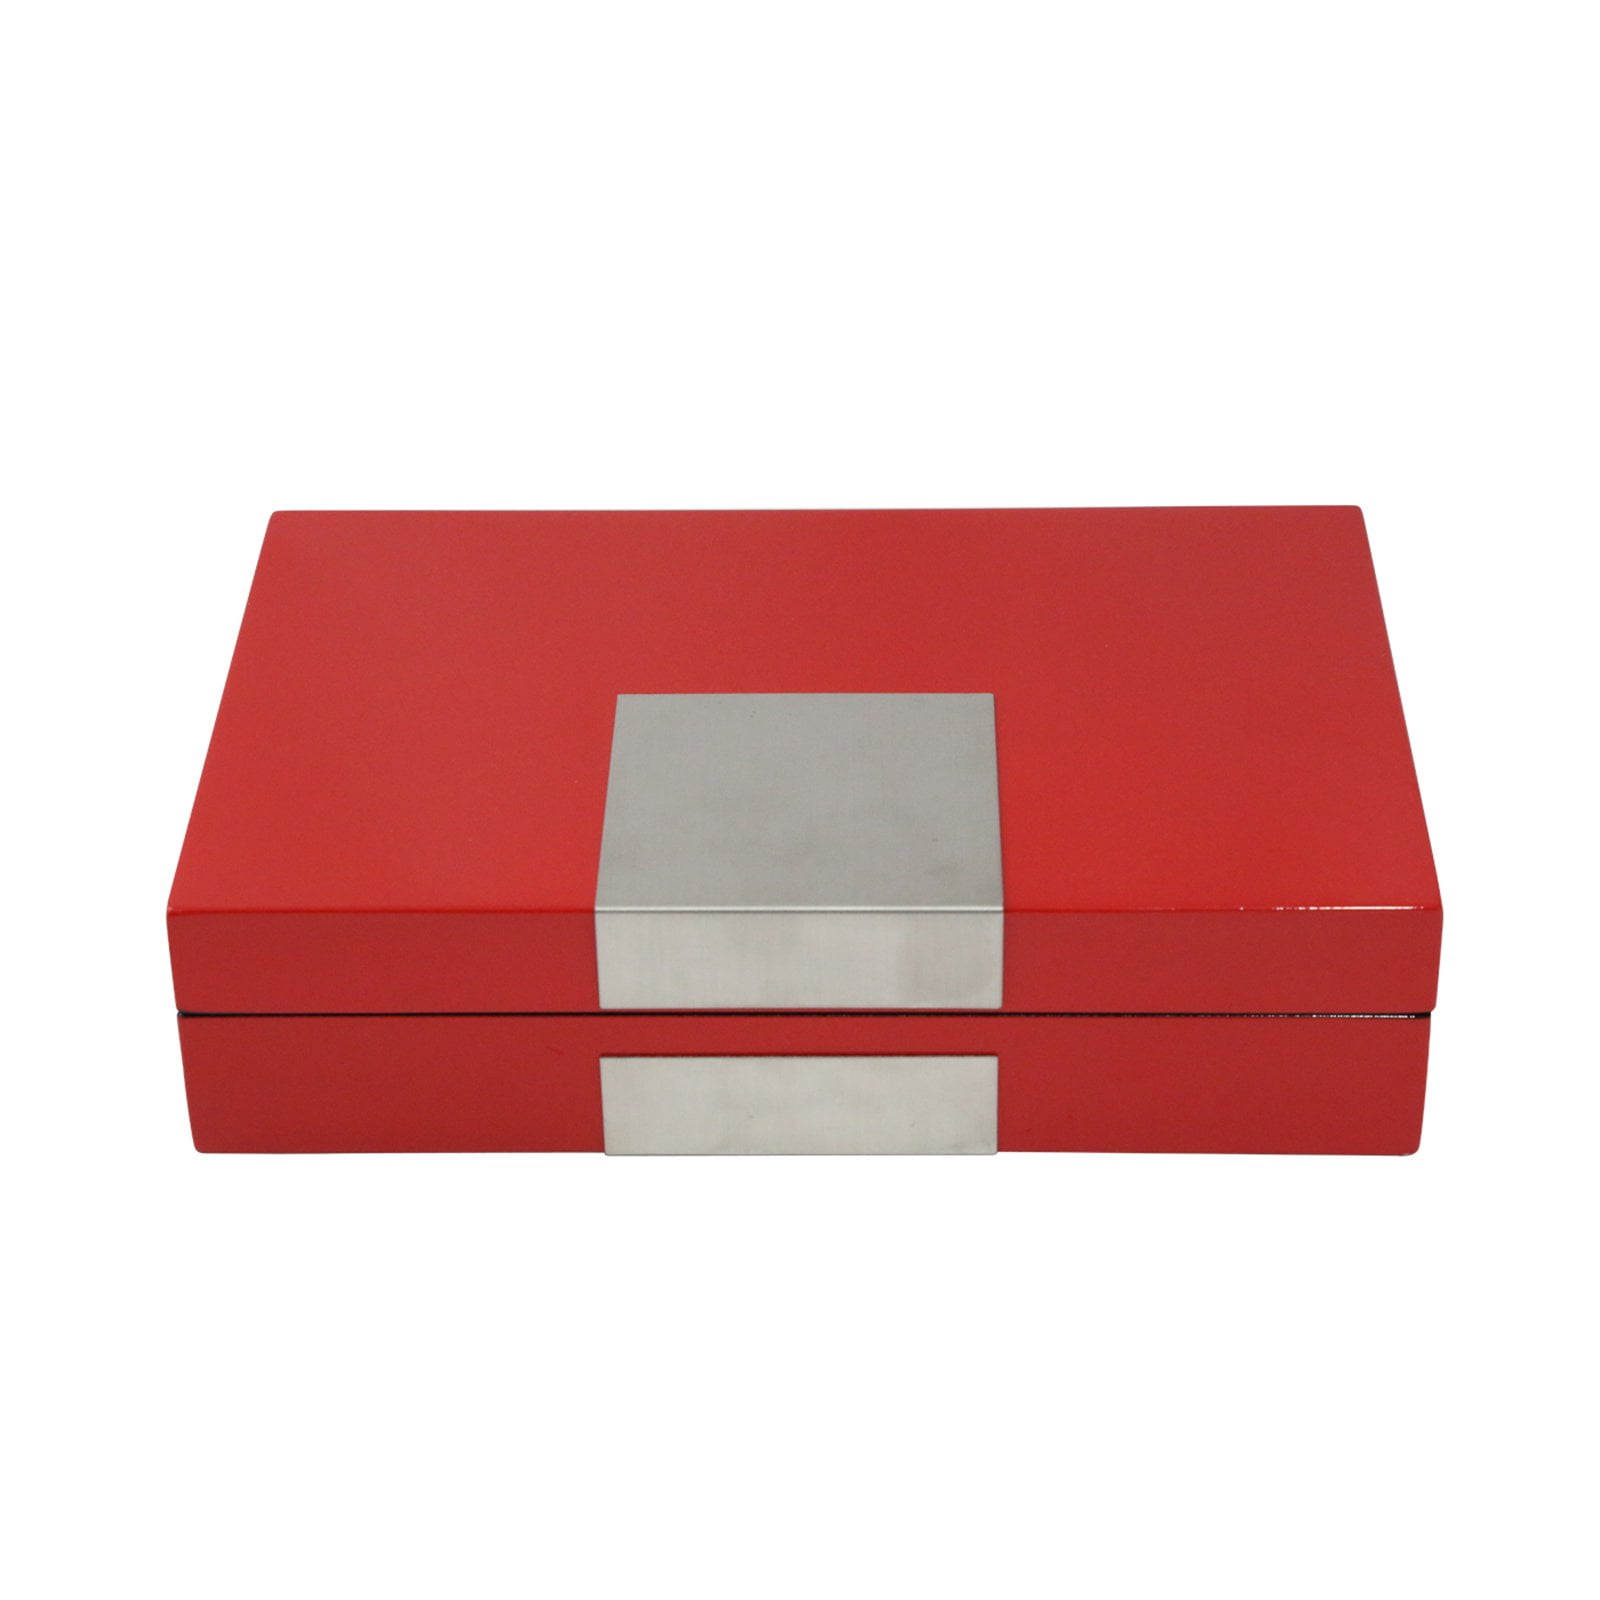 Bey-berk International Bb597red Lacquered Wood Valet Box With Stainless Steel Accents & Multi Compartments Storage - Red